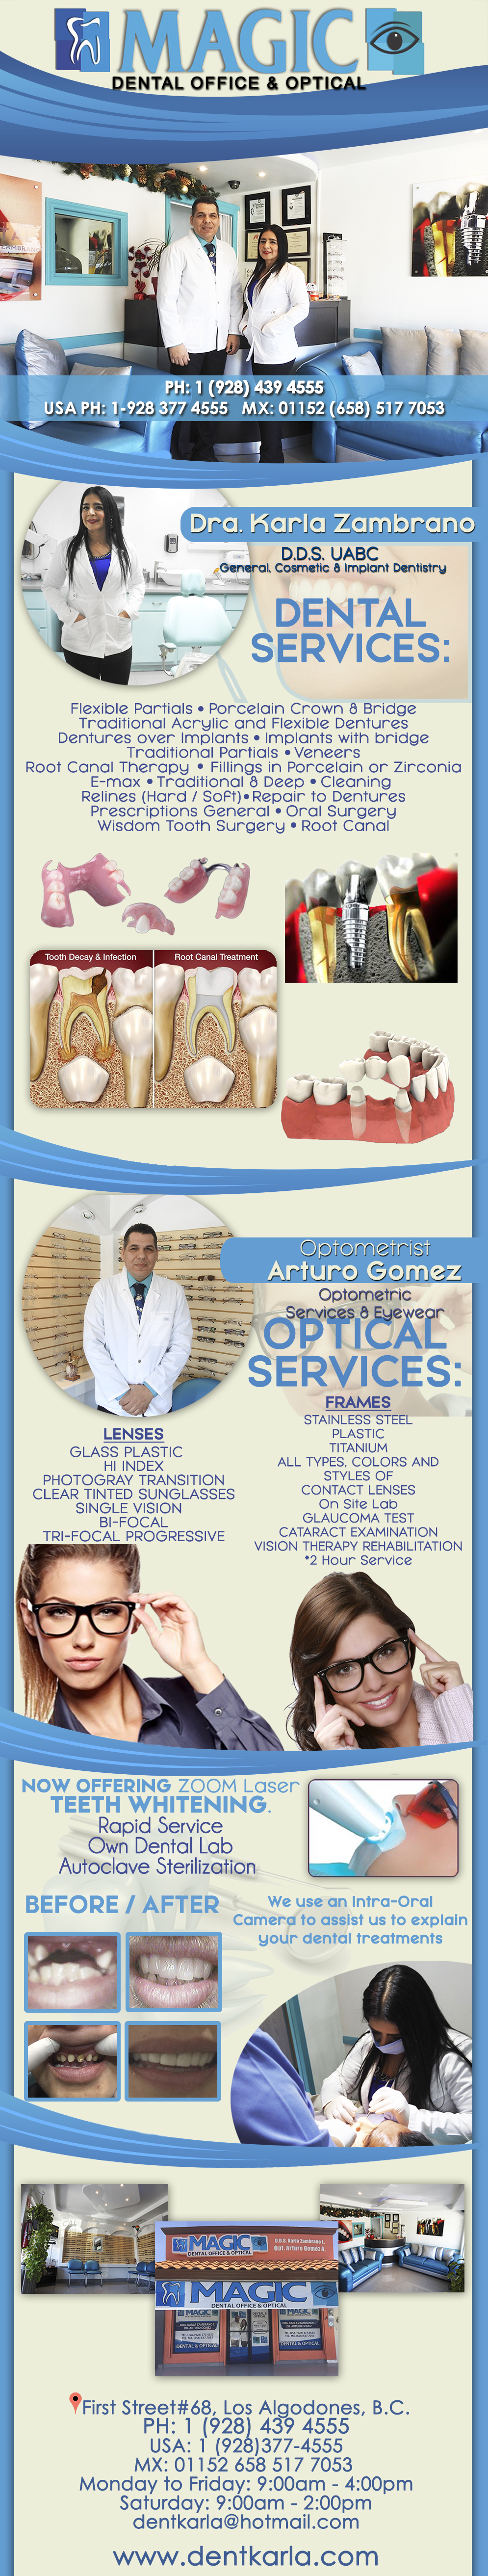 MAGIC Dental Office & Optical   Dra. Karla Zambrano DDS    Arturo G. Optometrist in Algodones  in Algodones  DENTAL SERVICES: Flexible Partials Porcelain Crown & Bridge Traditional Acrylic and Flexible Dentures Dentures over Implants Implants with bridge Traditional Partials Veneers Root Canal Therapy  Fillings in Porcelain or Zirconia E-max Traditional & Deep Cleaning Relines (Hard  Soft) Repair to Dentures Prescriptions General Oral Surgery Wisdom Tooth Surger OPTICAL SERVICES.- Lenses: Glass  Plastic    
Hi Index Photogray  Transition Clear   Tinted  Sunglasses Single Vision  Bi-focal
Tri-focal  Progressive      Frames: Stainless Steel Plastic Titanium
All types, Colors and Styles of Contact Lenses. On site lab, Glaucoma Test, Cataract Examination, Vision Therapy Rehabilitation
*2 hour service                  DENTAL SERVICES: Flexible Partials Porcelain Crown & Bridge Traditional Acrylic and Flexible Dentures Dentures over Implants Implants with bridge Traditional Partials Veneers Root Canal Therapy  Fillings in Porcelain or Zirconia E-max Traditional & Deep Cleaning Relines (Hard  Soft) Repair to Dentures Prescriptions General Oral Surgery Wisdom Tooth Surger OPTICAL SERVICES.- Lenses: Glass  Plastic    
Hi Index Photogray  Transition Clear   Tinted  Sunglasses Single Vision  Bi-focal
Tri-focal  Progressive      Frames: Stainless Steel Plastic Titanium
All types, Colors and Styles of Contact Lenses. On site lab, Glaucoma Test, Cataract Examination, Vision Therapy Rehabilitation
*2 hour service                 